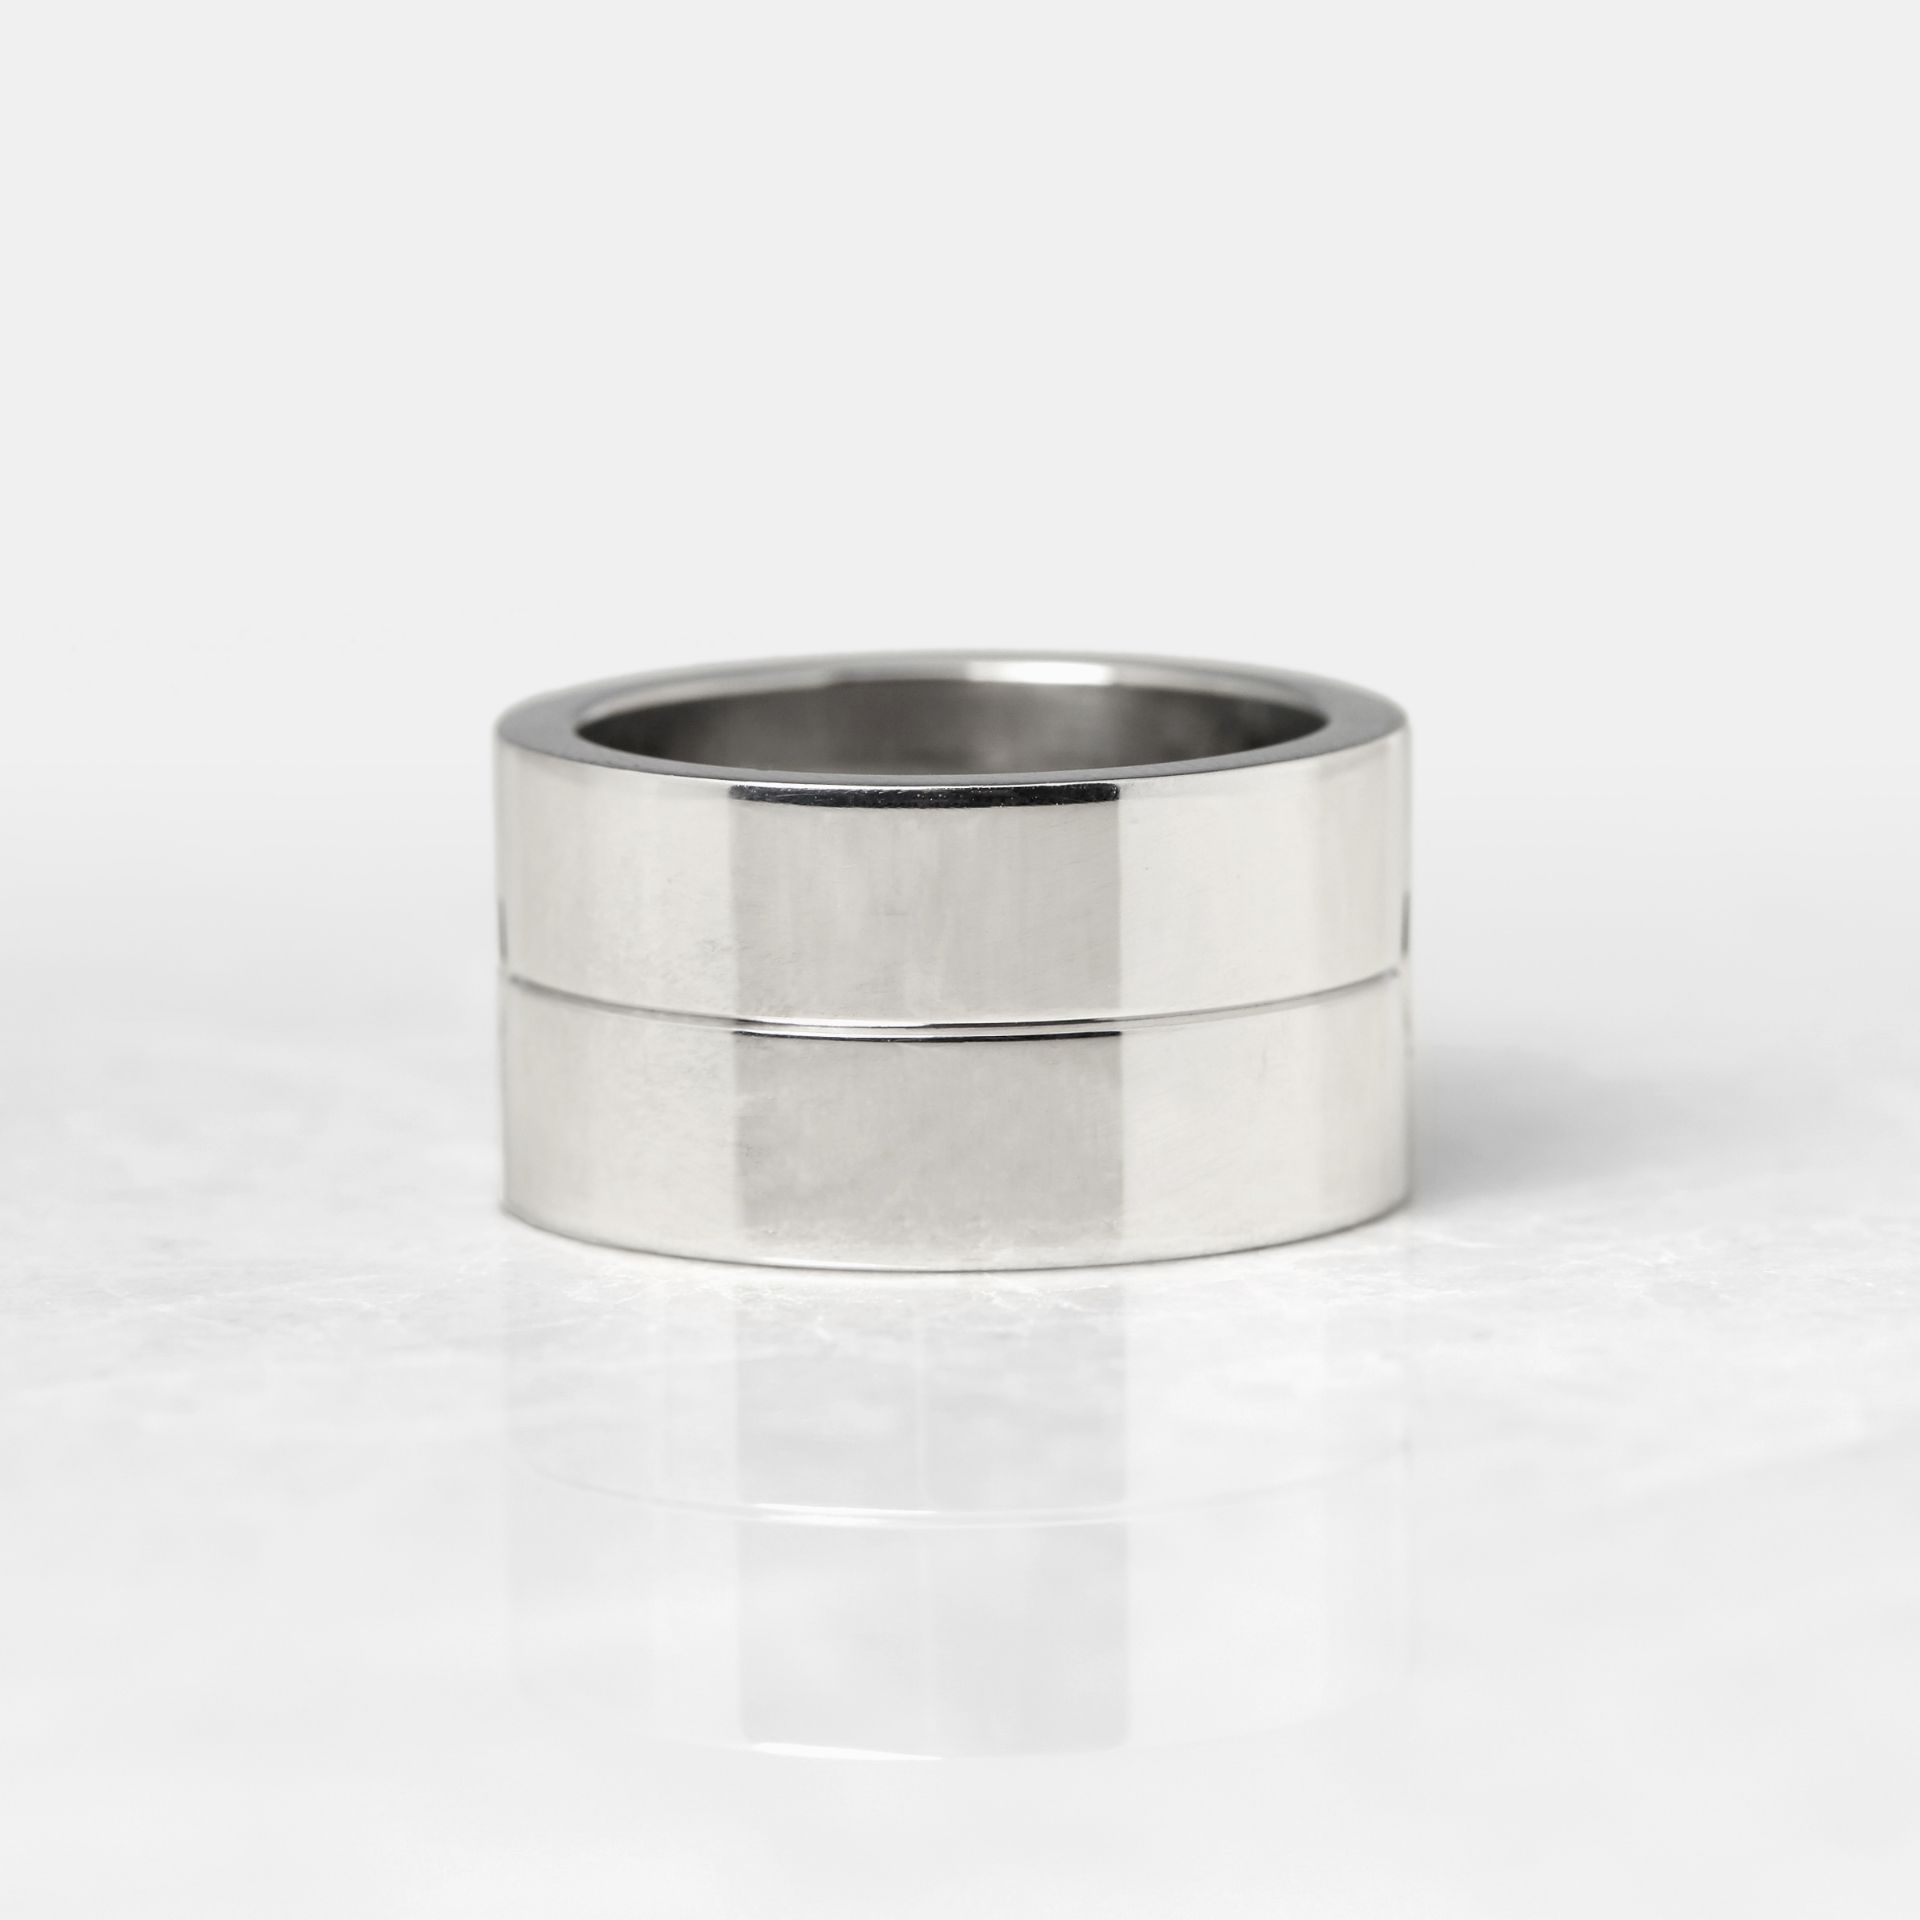 Cartier 18k White Gold High Love Ring - Image 3 of 8